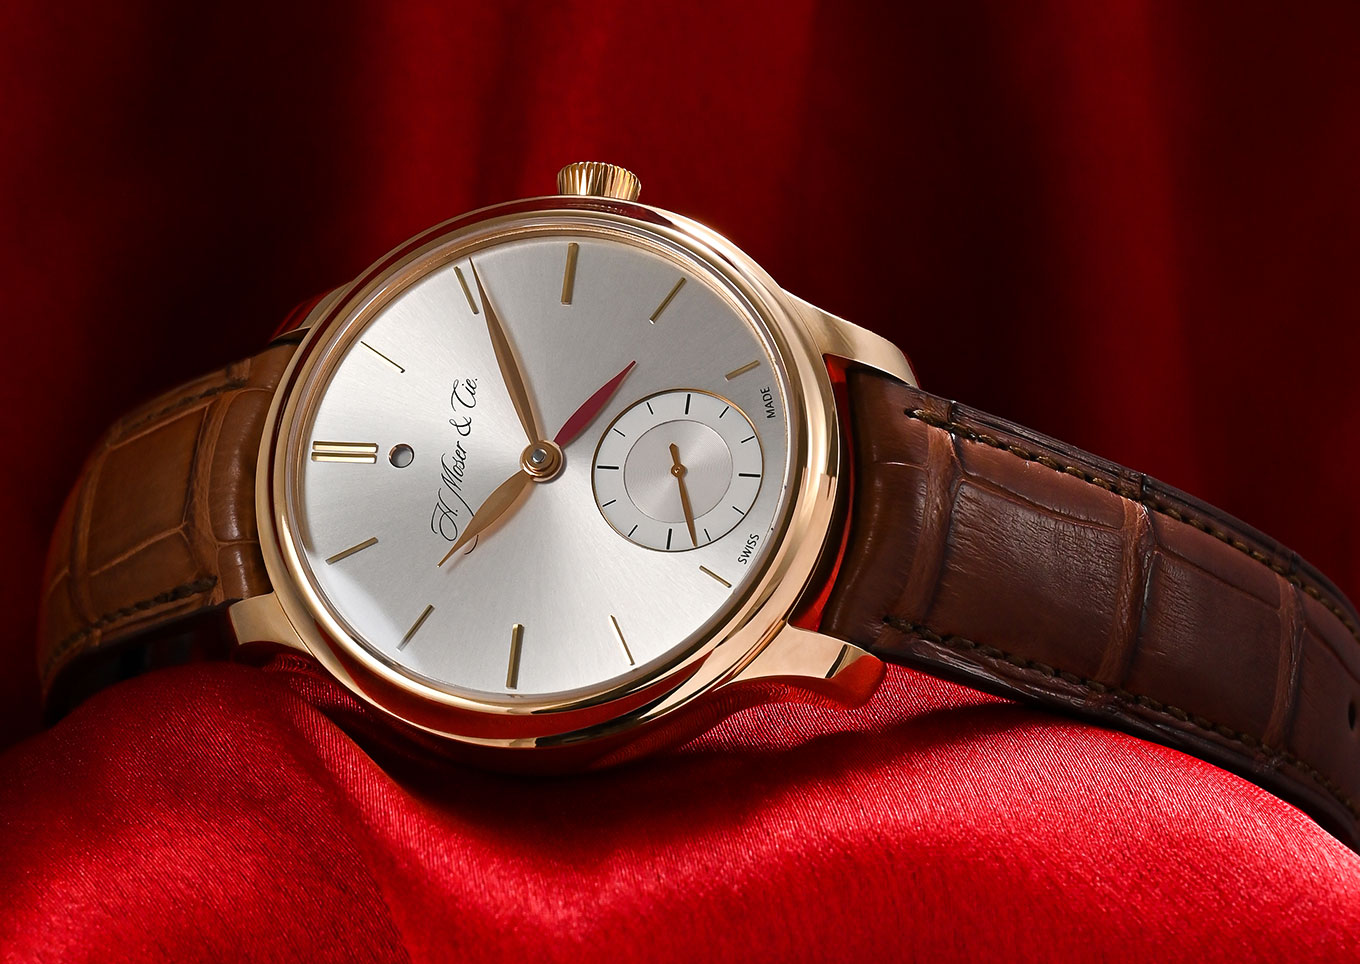 H. Moser & Cie. Watch at second movement